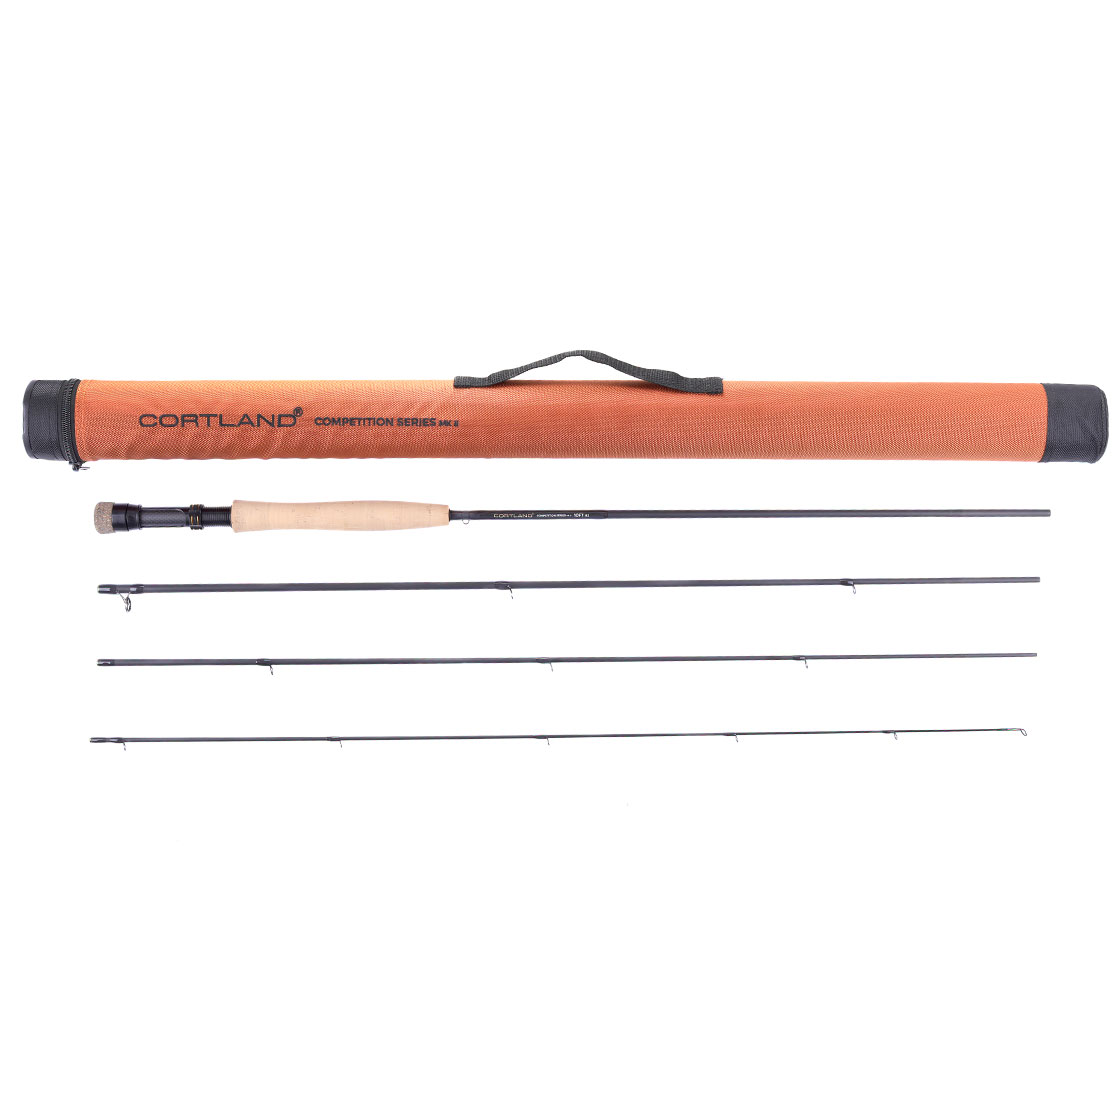 Cortland Competition MKII Nymph Fly Rod, 10 ft / 2 WT